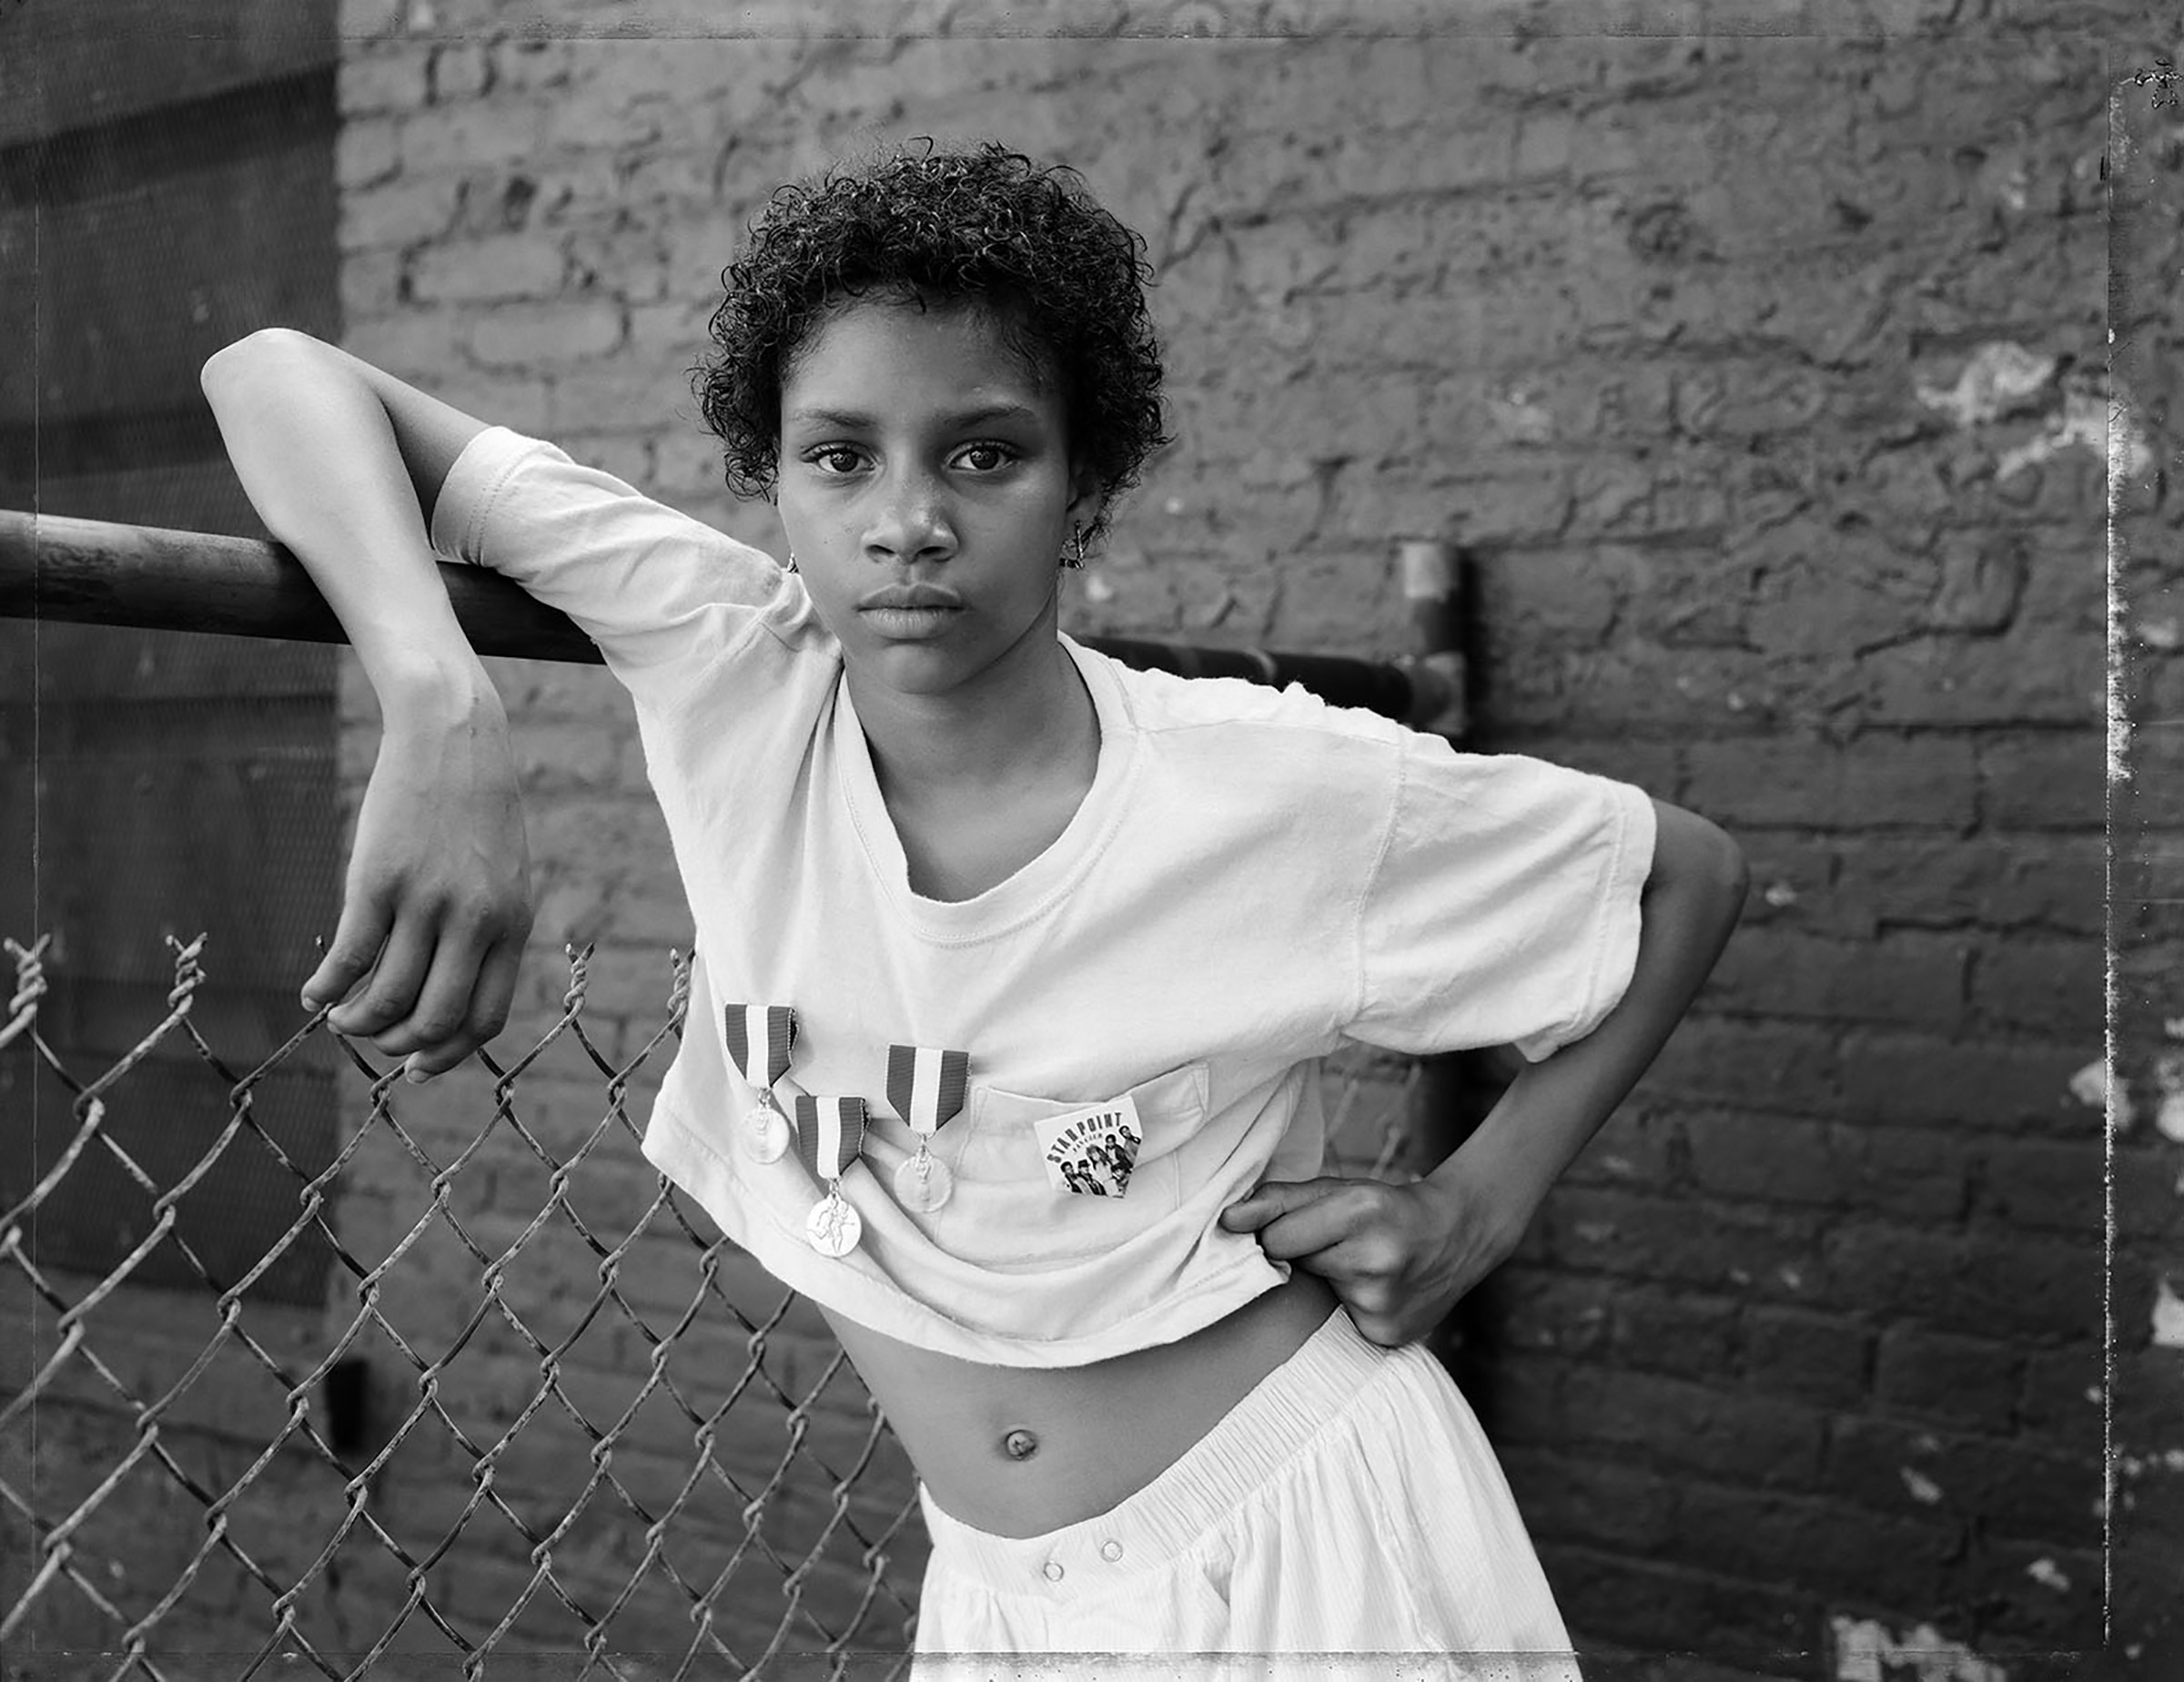 A Girl with School Medals, Brooklyn, NY, 1988, from Street Portraits (Dawoud Bey—MACK)